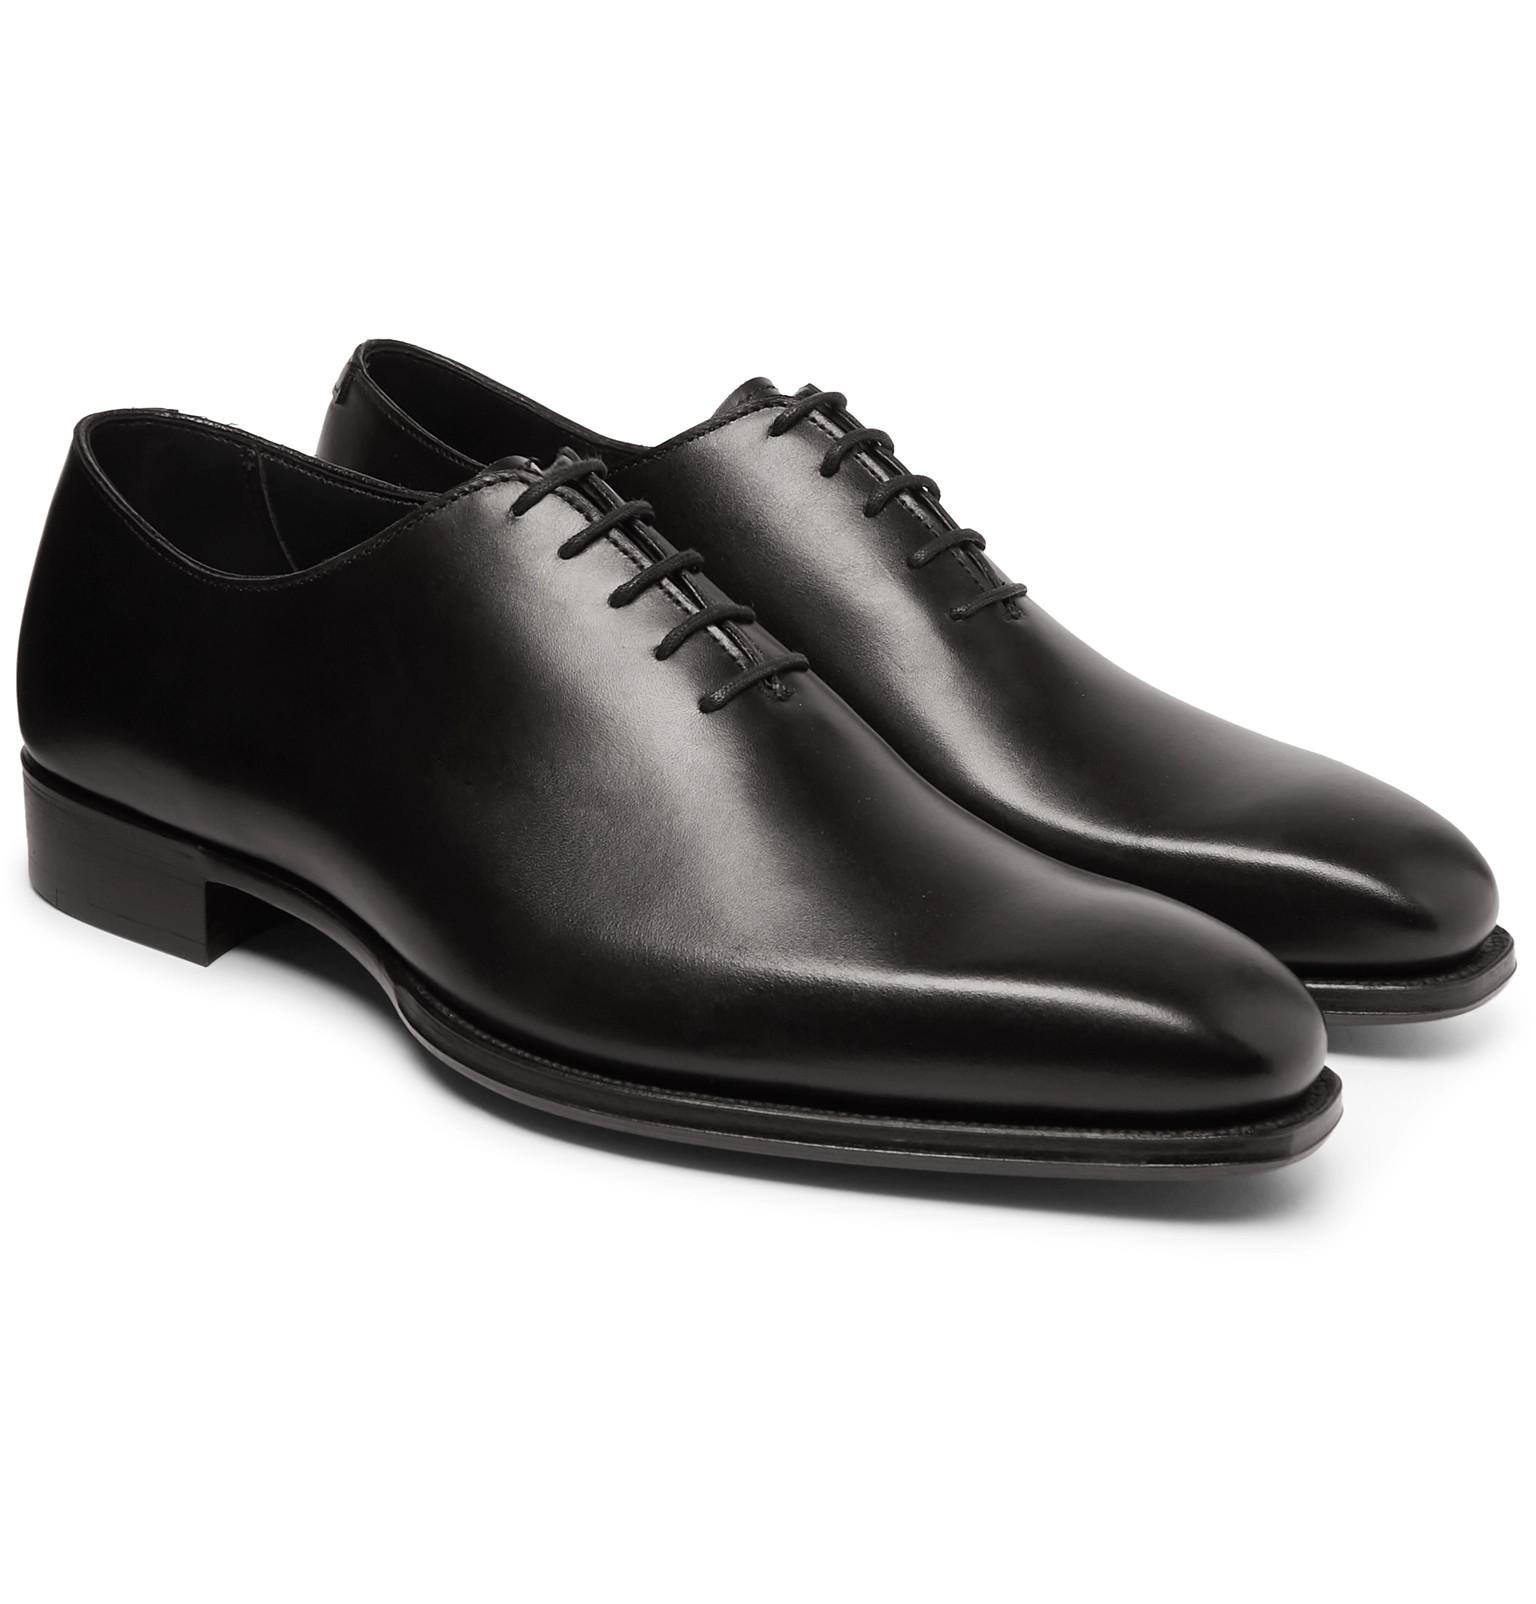 Kingsman + George Cleverley Merlin Whole-cut Leather Oxford Shoes in ...